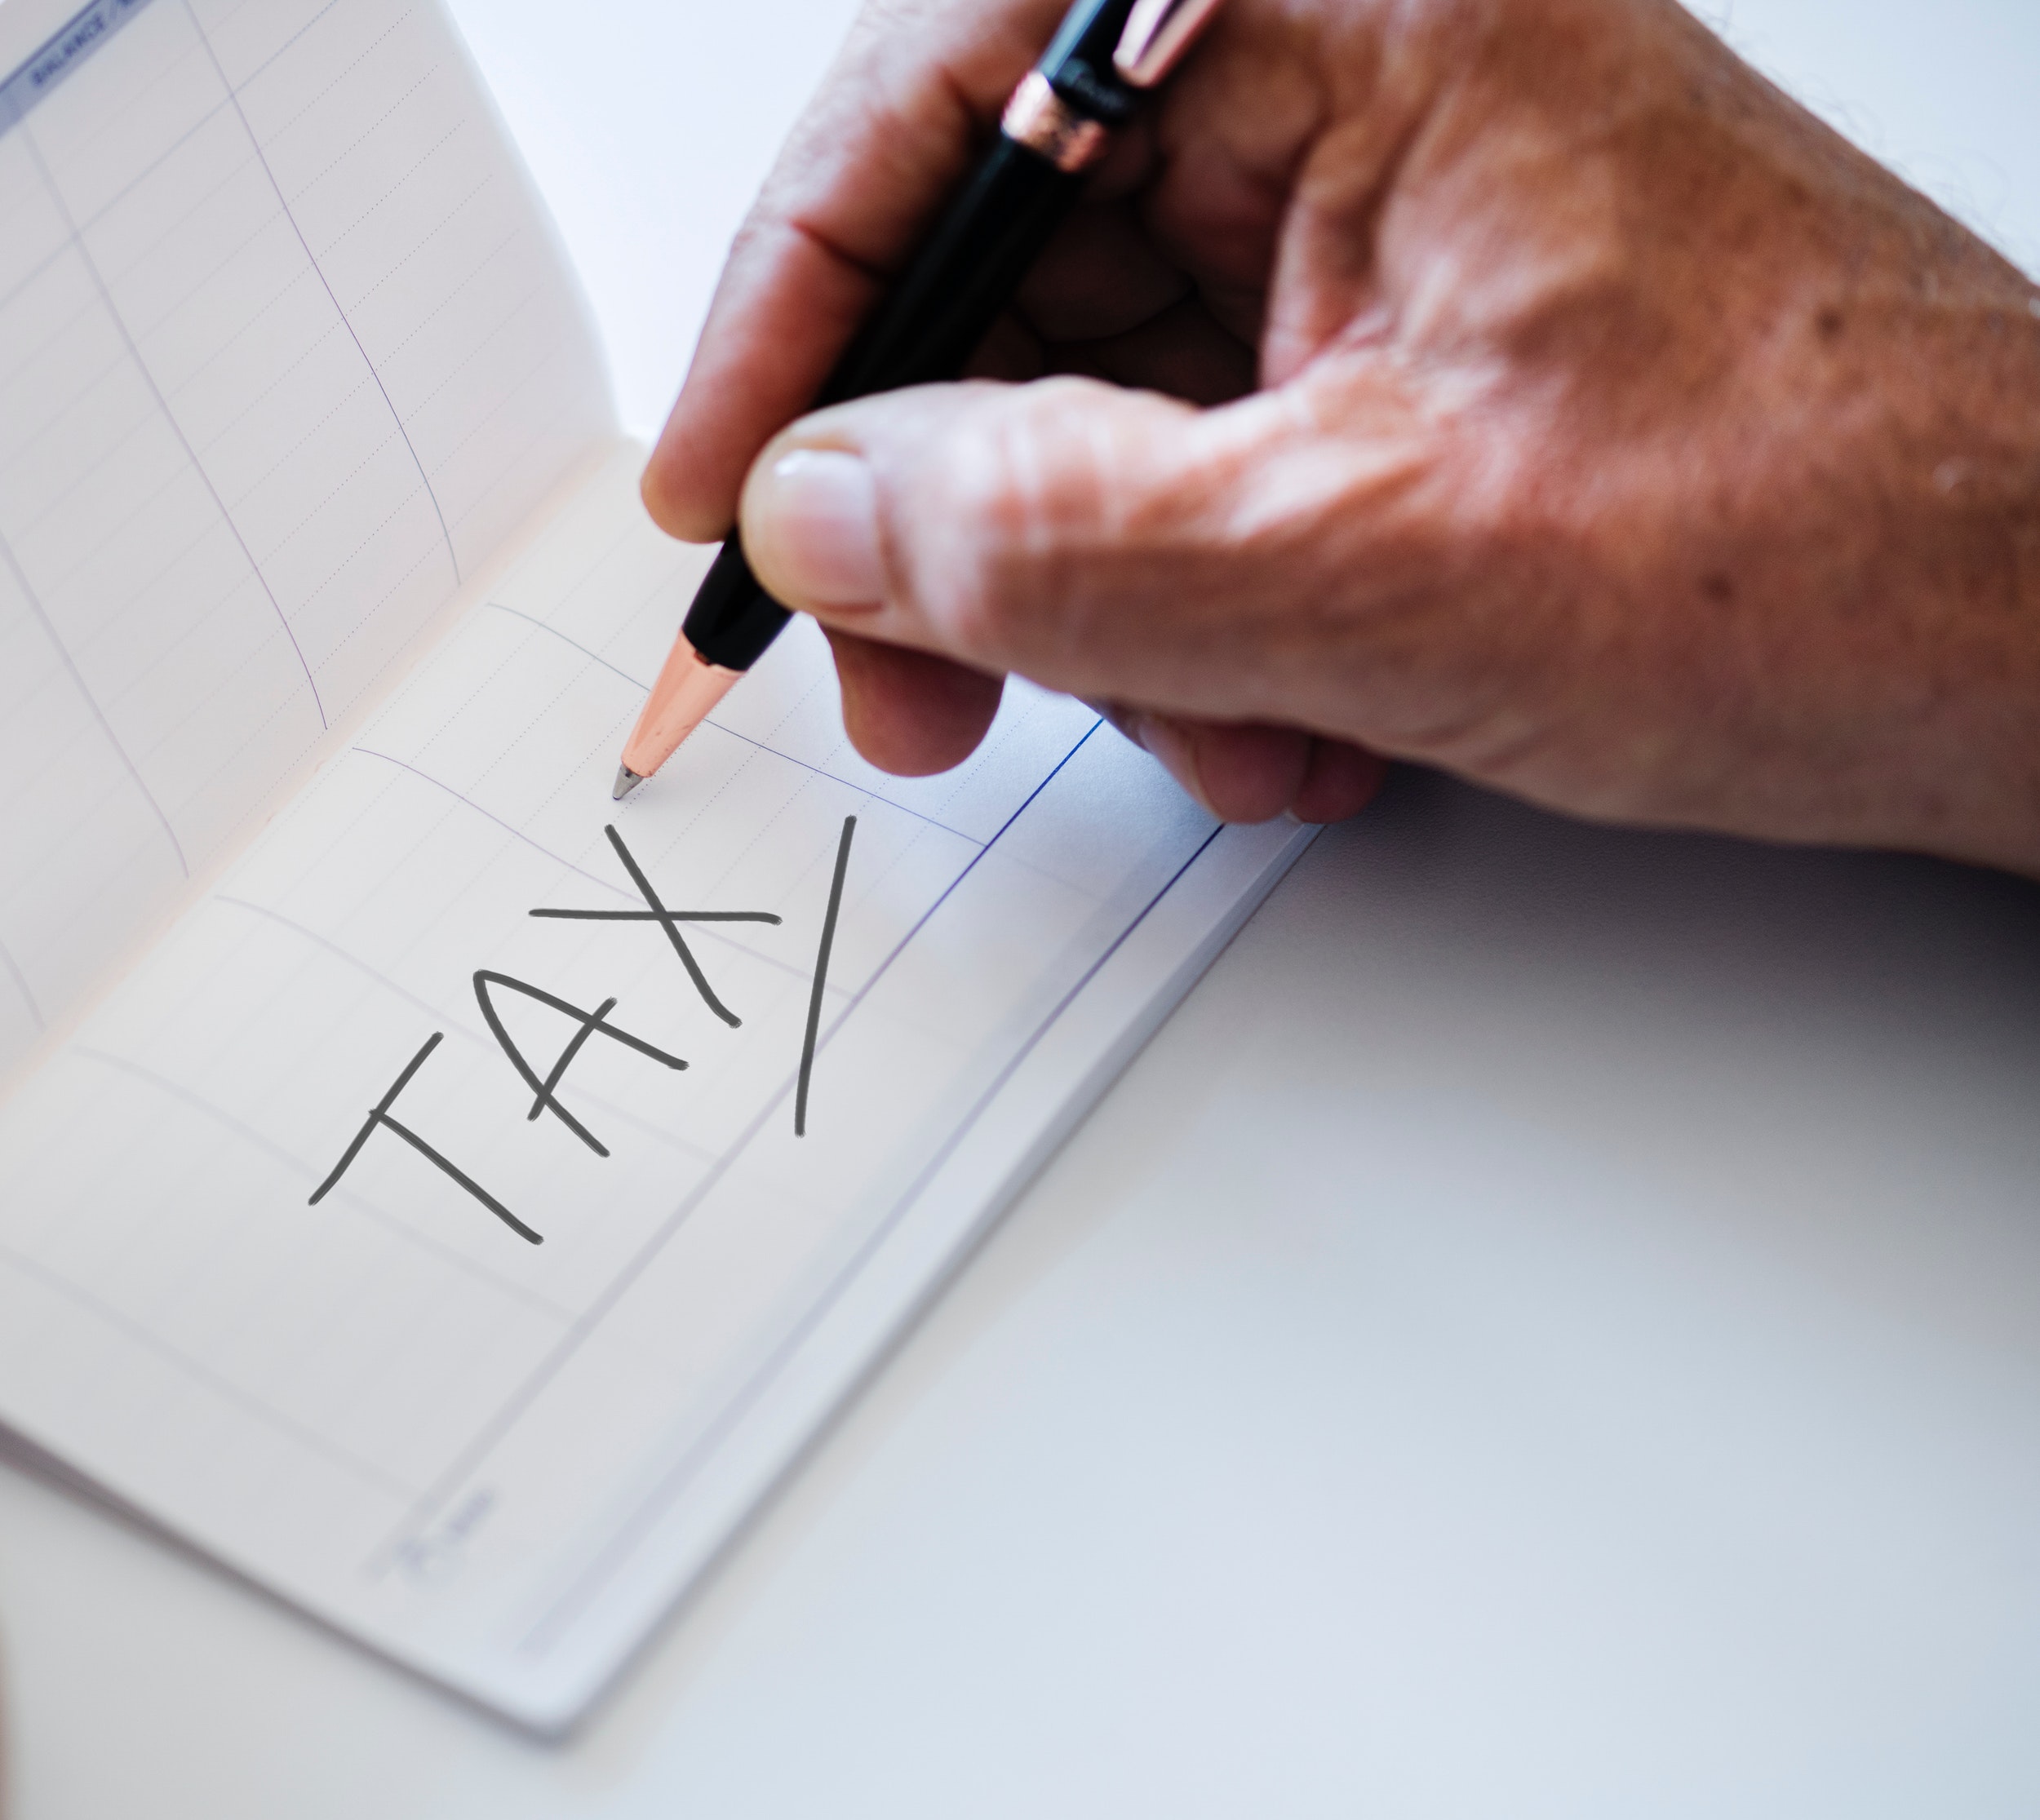 Tax Time Already? Check Your W-4 Now, Avoid Surprises Later